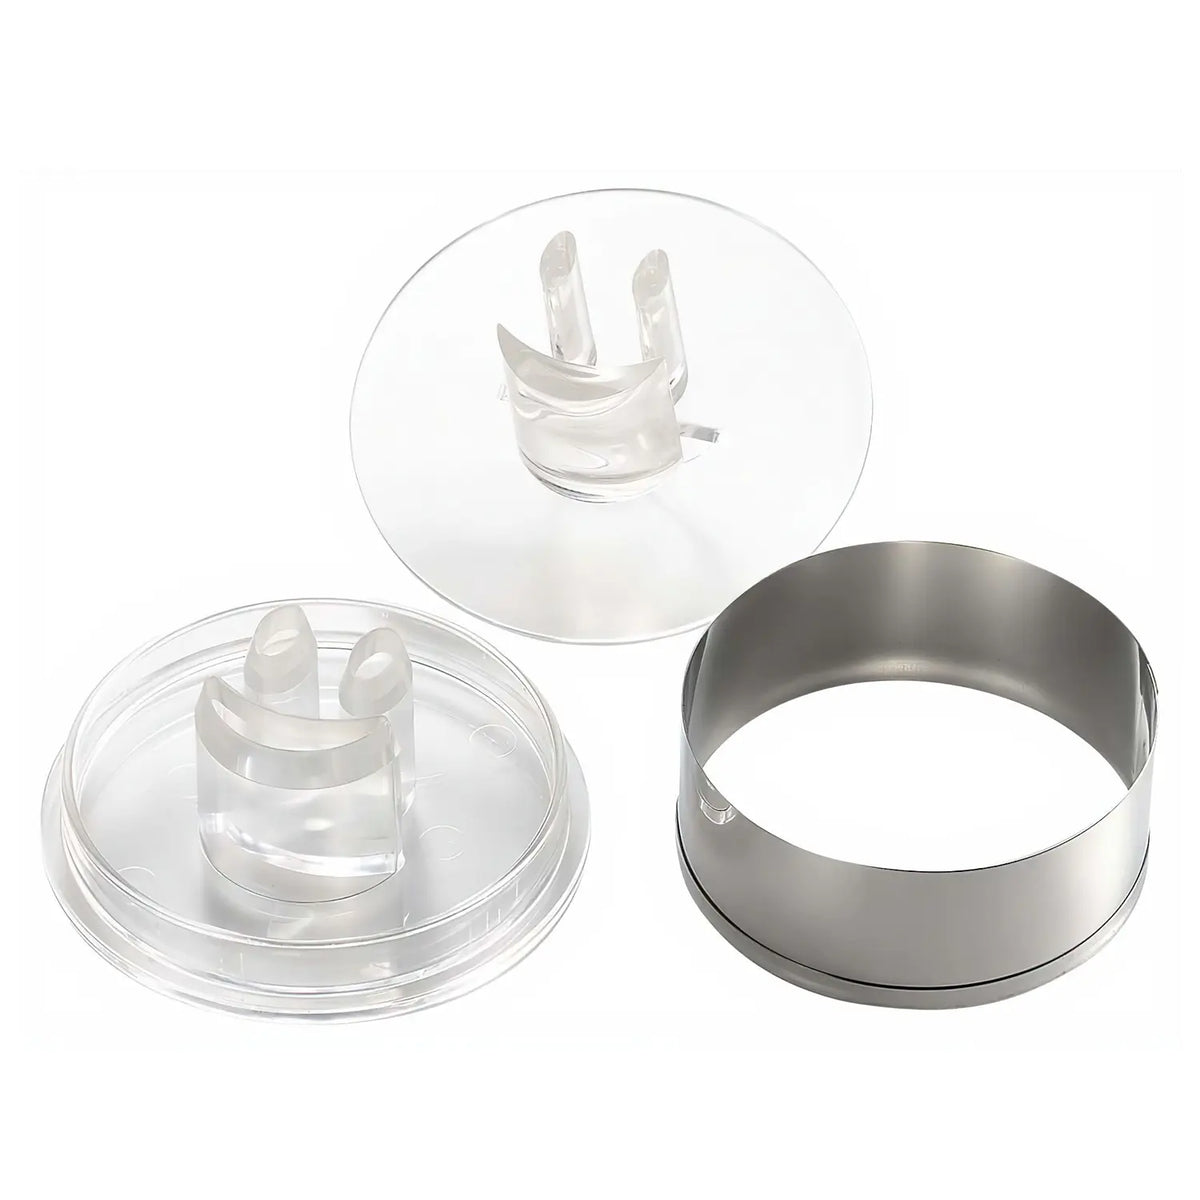 TIGERCROWN Cake Land Stainless Steel Round Cookie Cutter